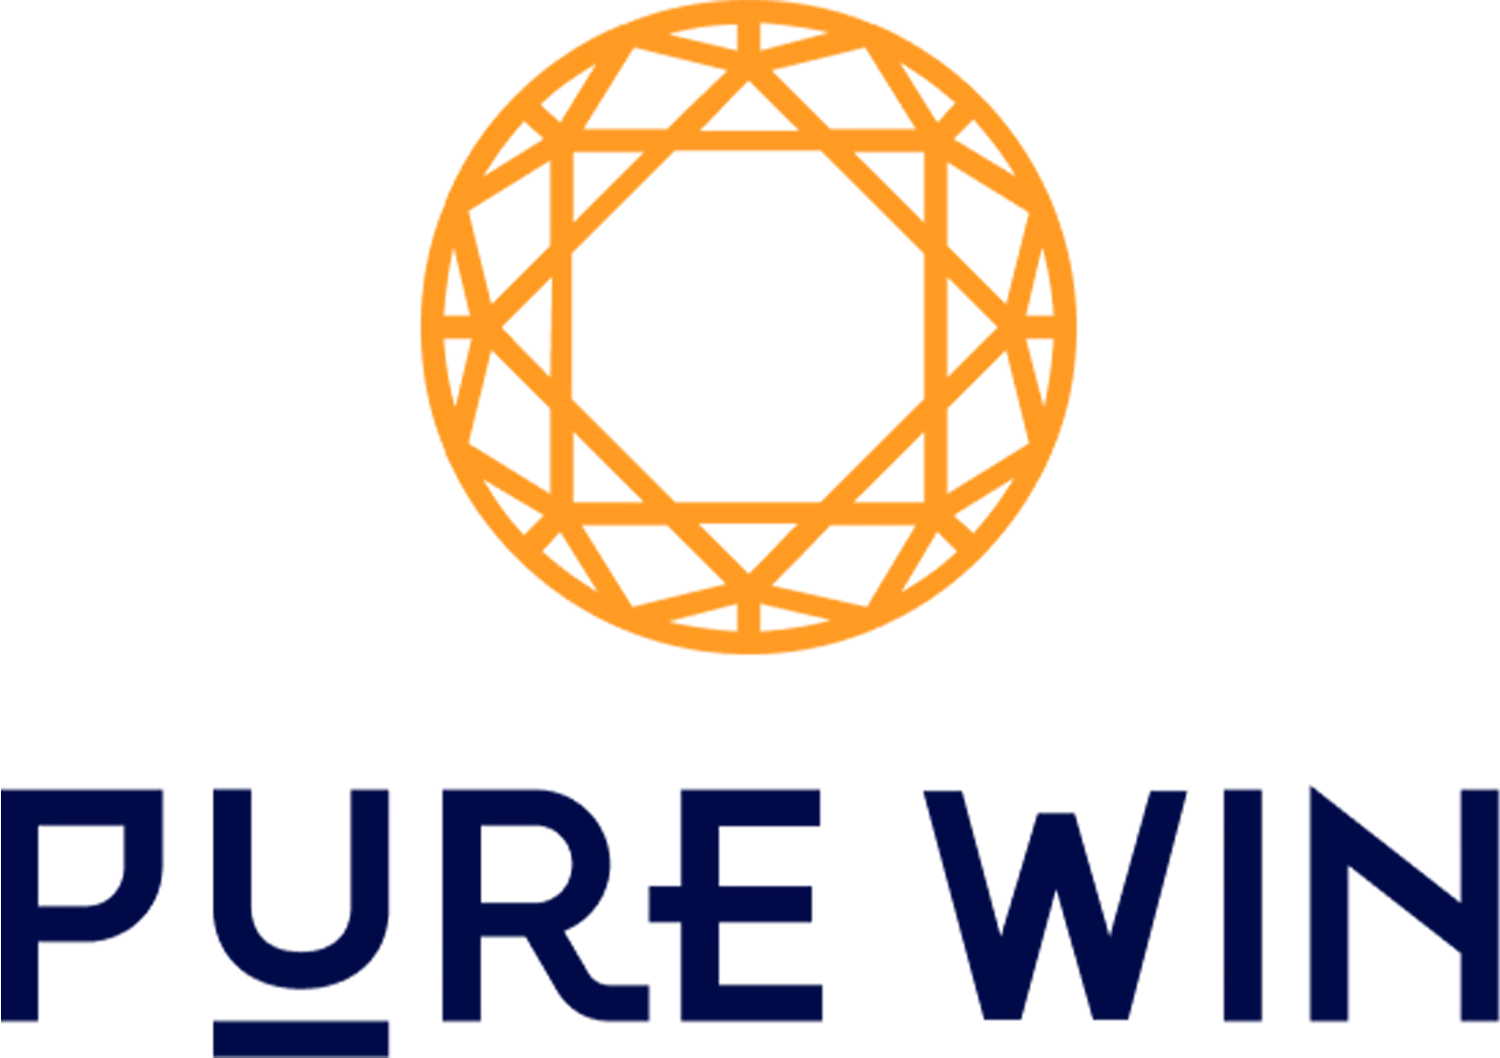 Watch our video review of Pure Win for Indian users.